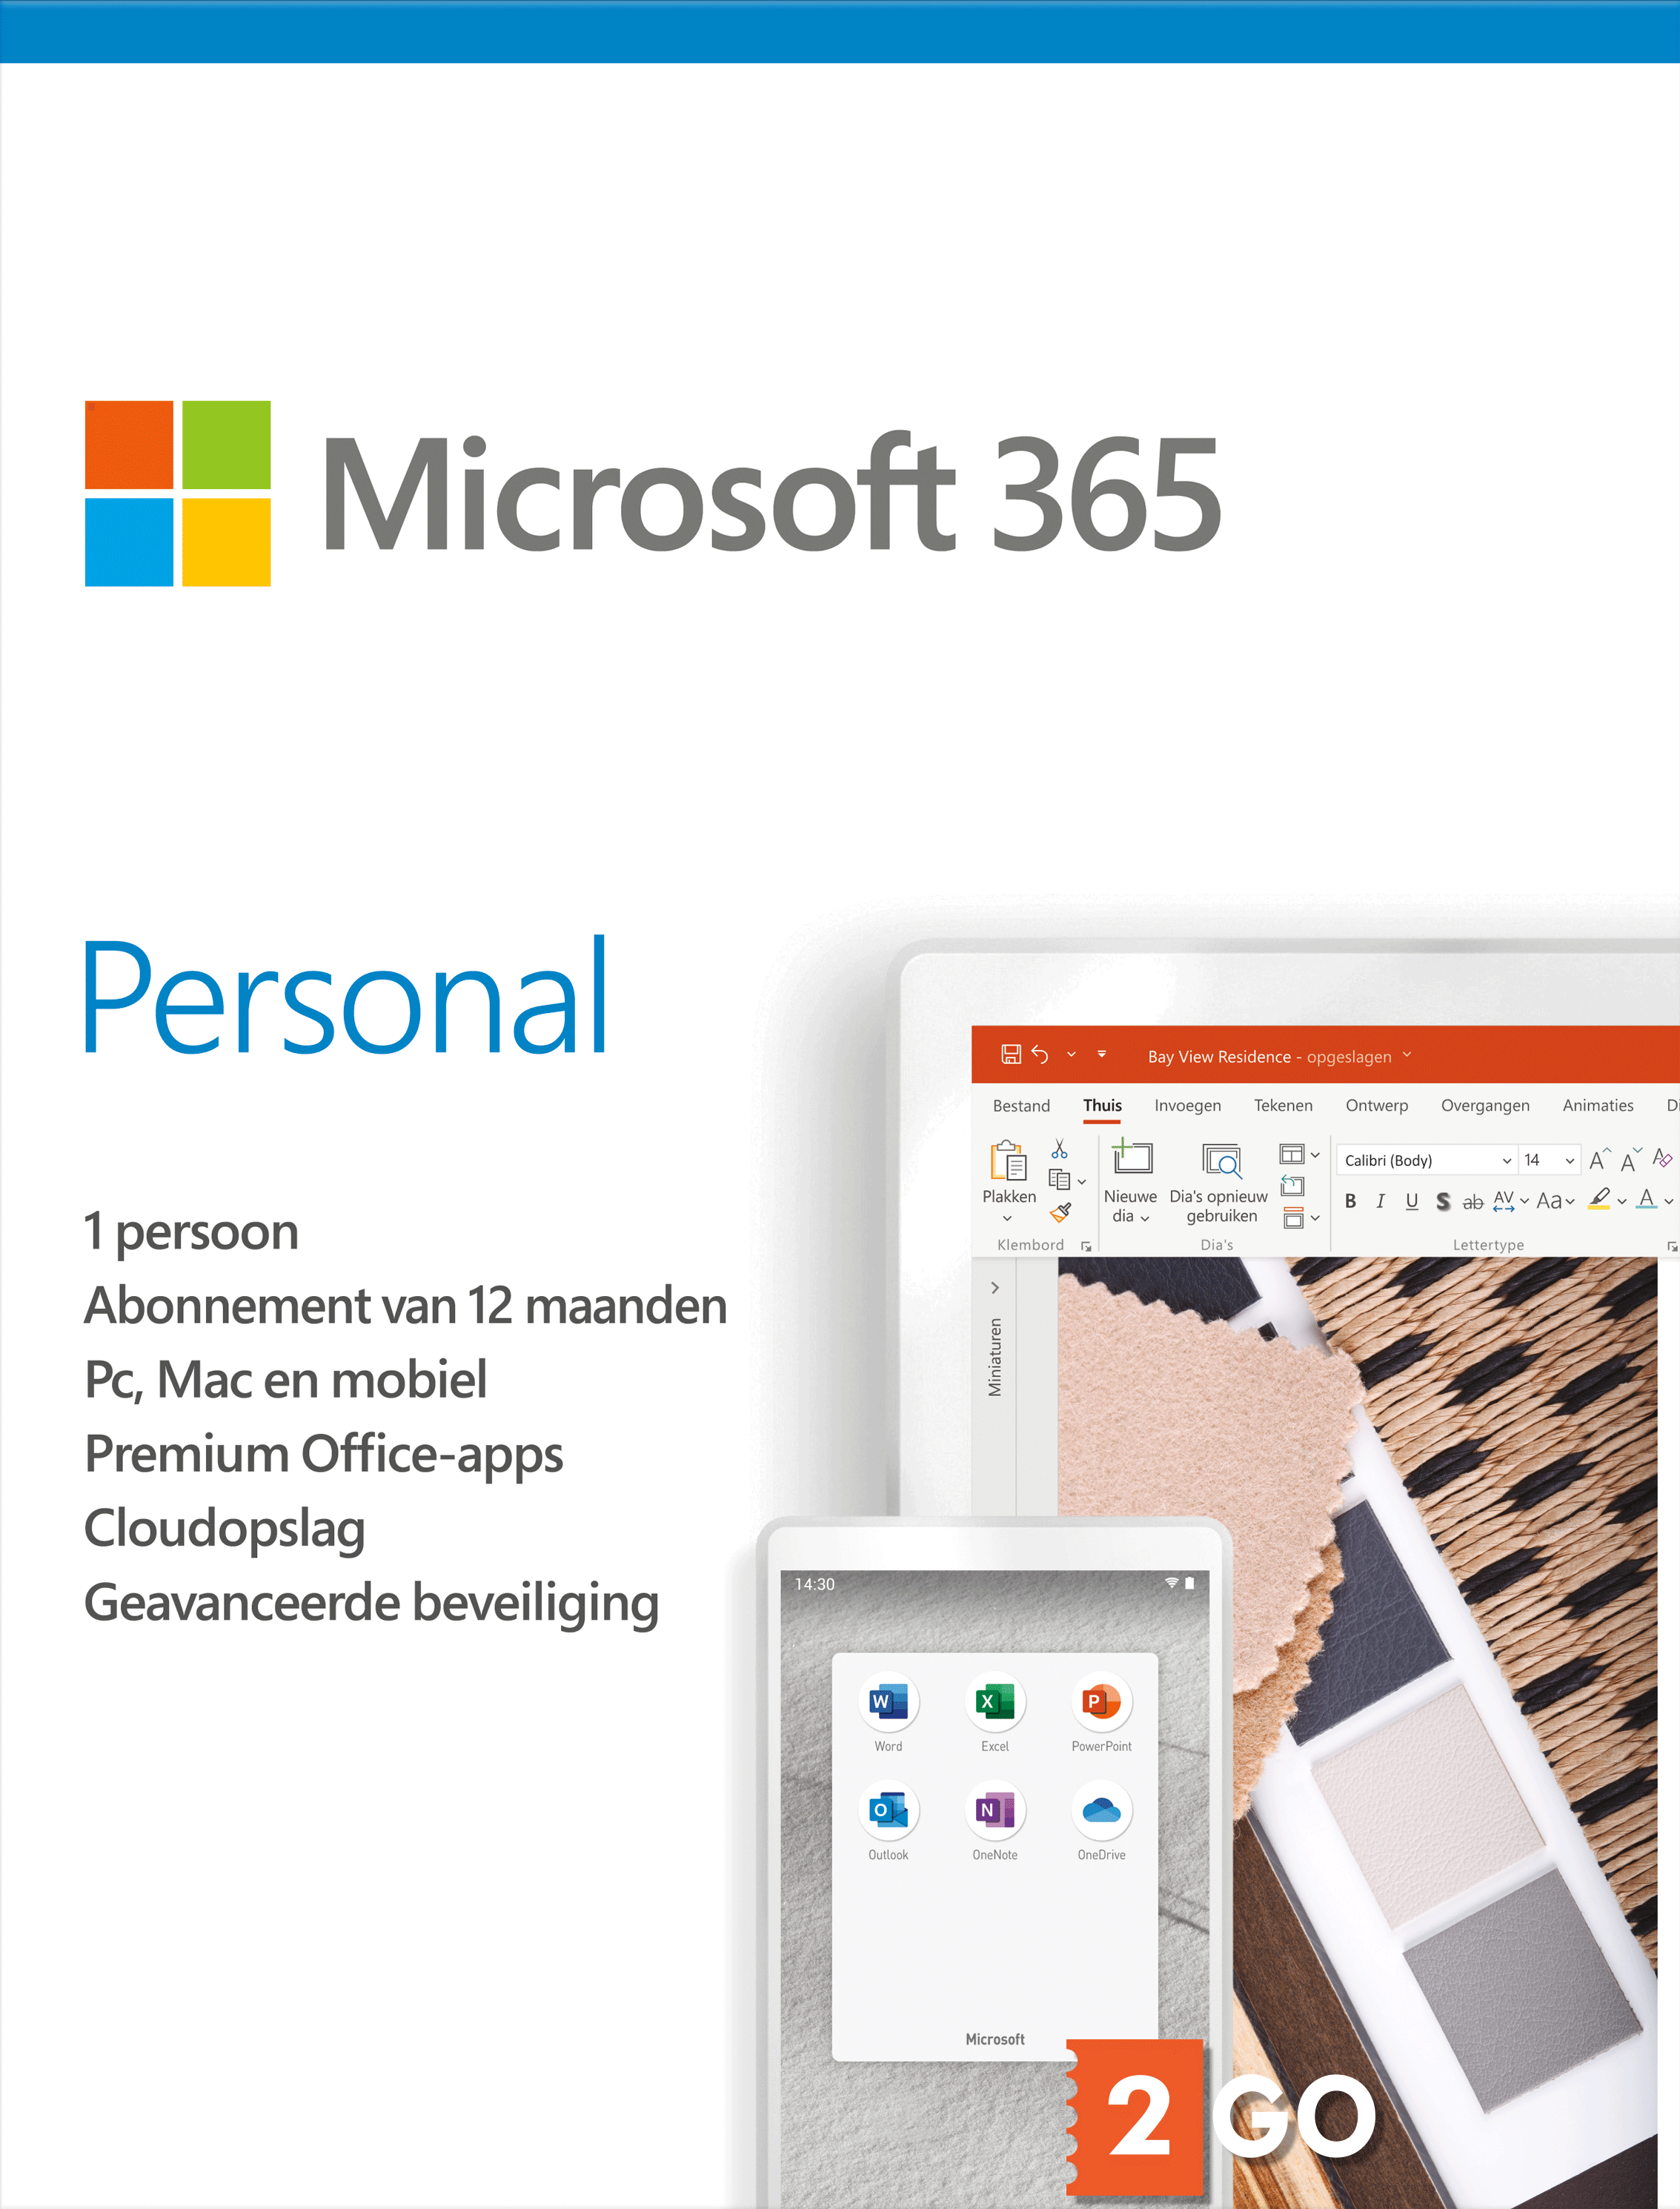 Microsoft 365 Personal 1 PC or Mac License / 12-Month Subscription / Product Key Code, Office Applications, Full Version, Retail Box,